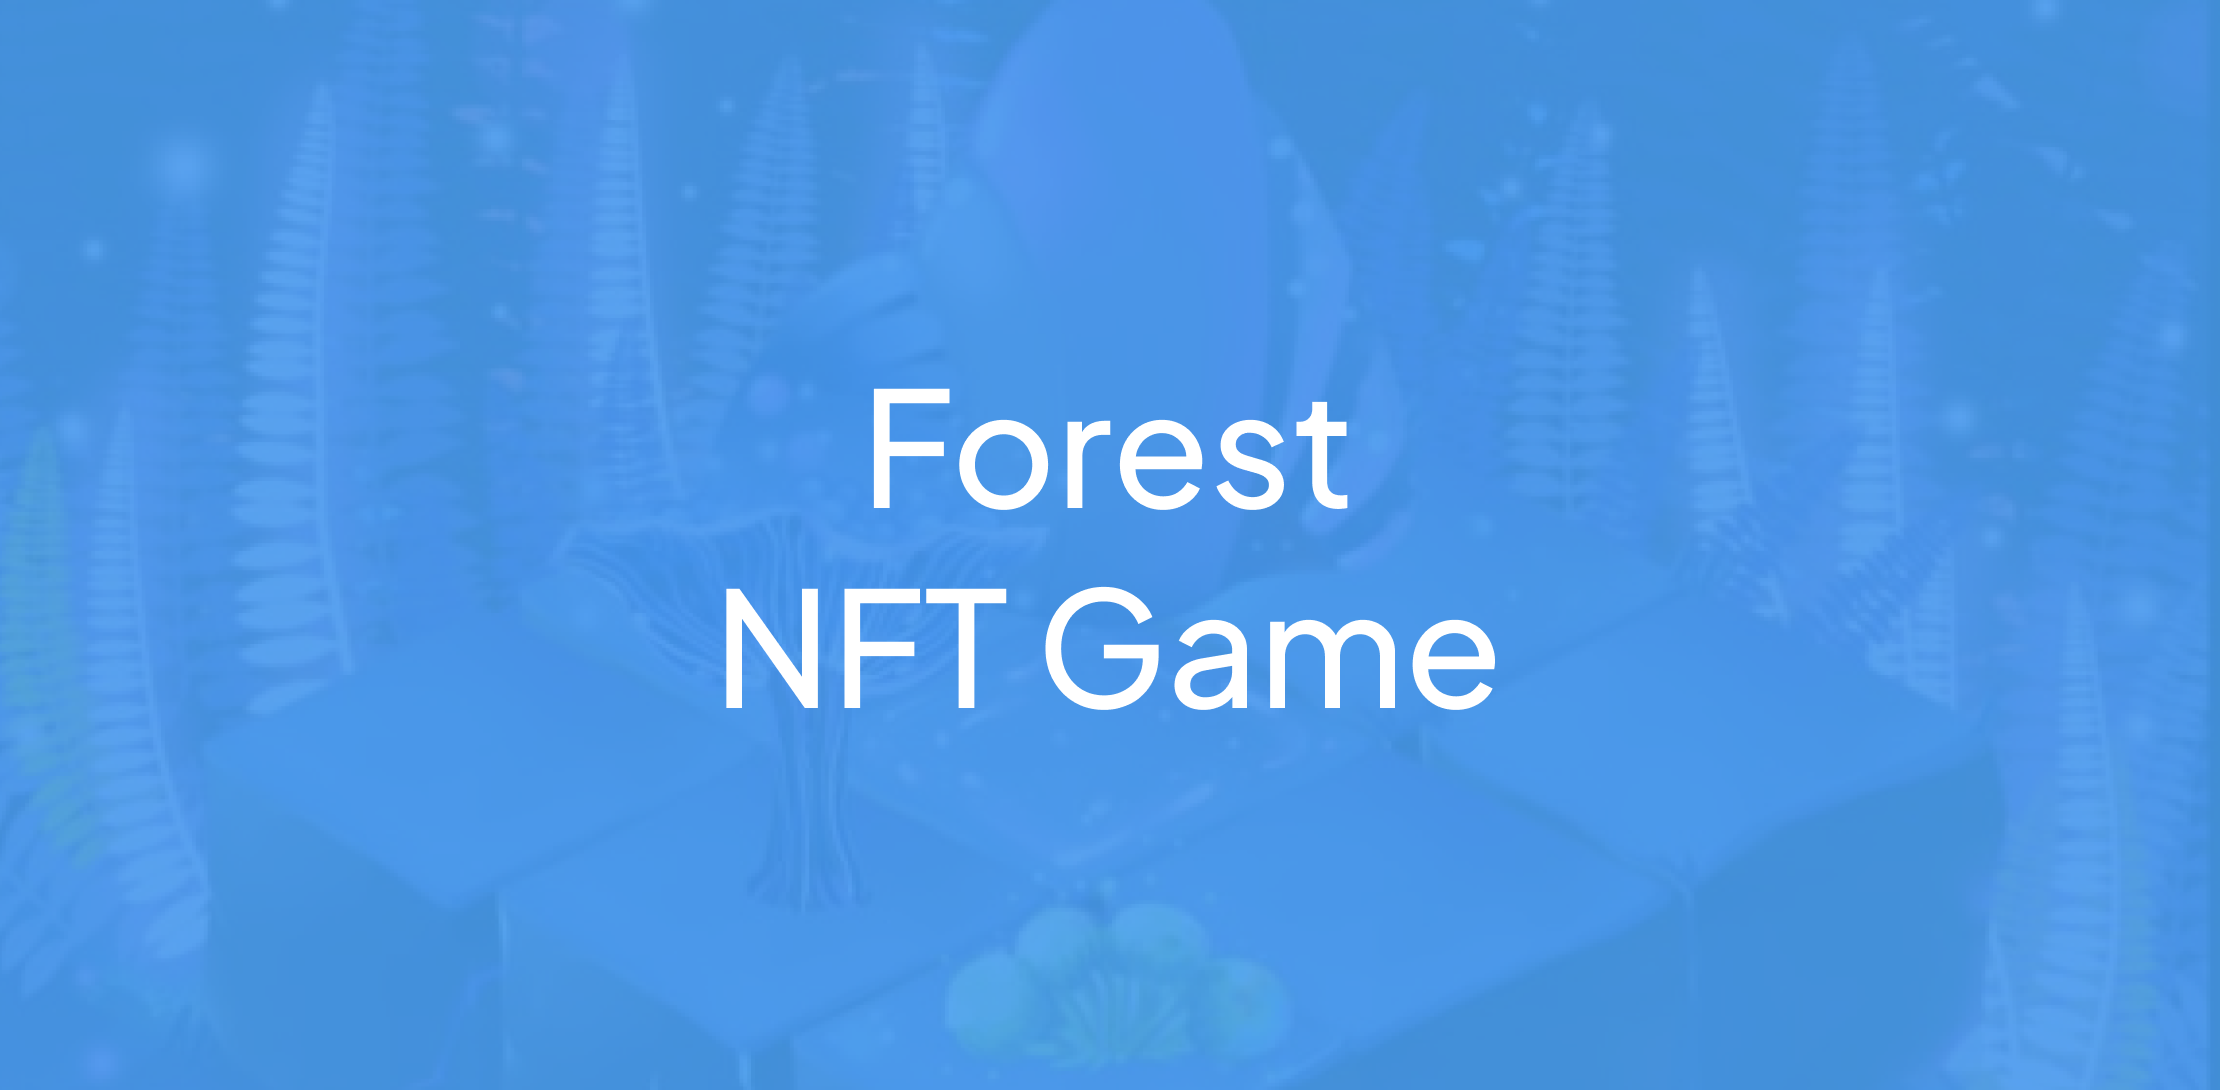 FOREST NFT GAME